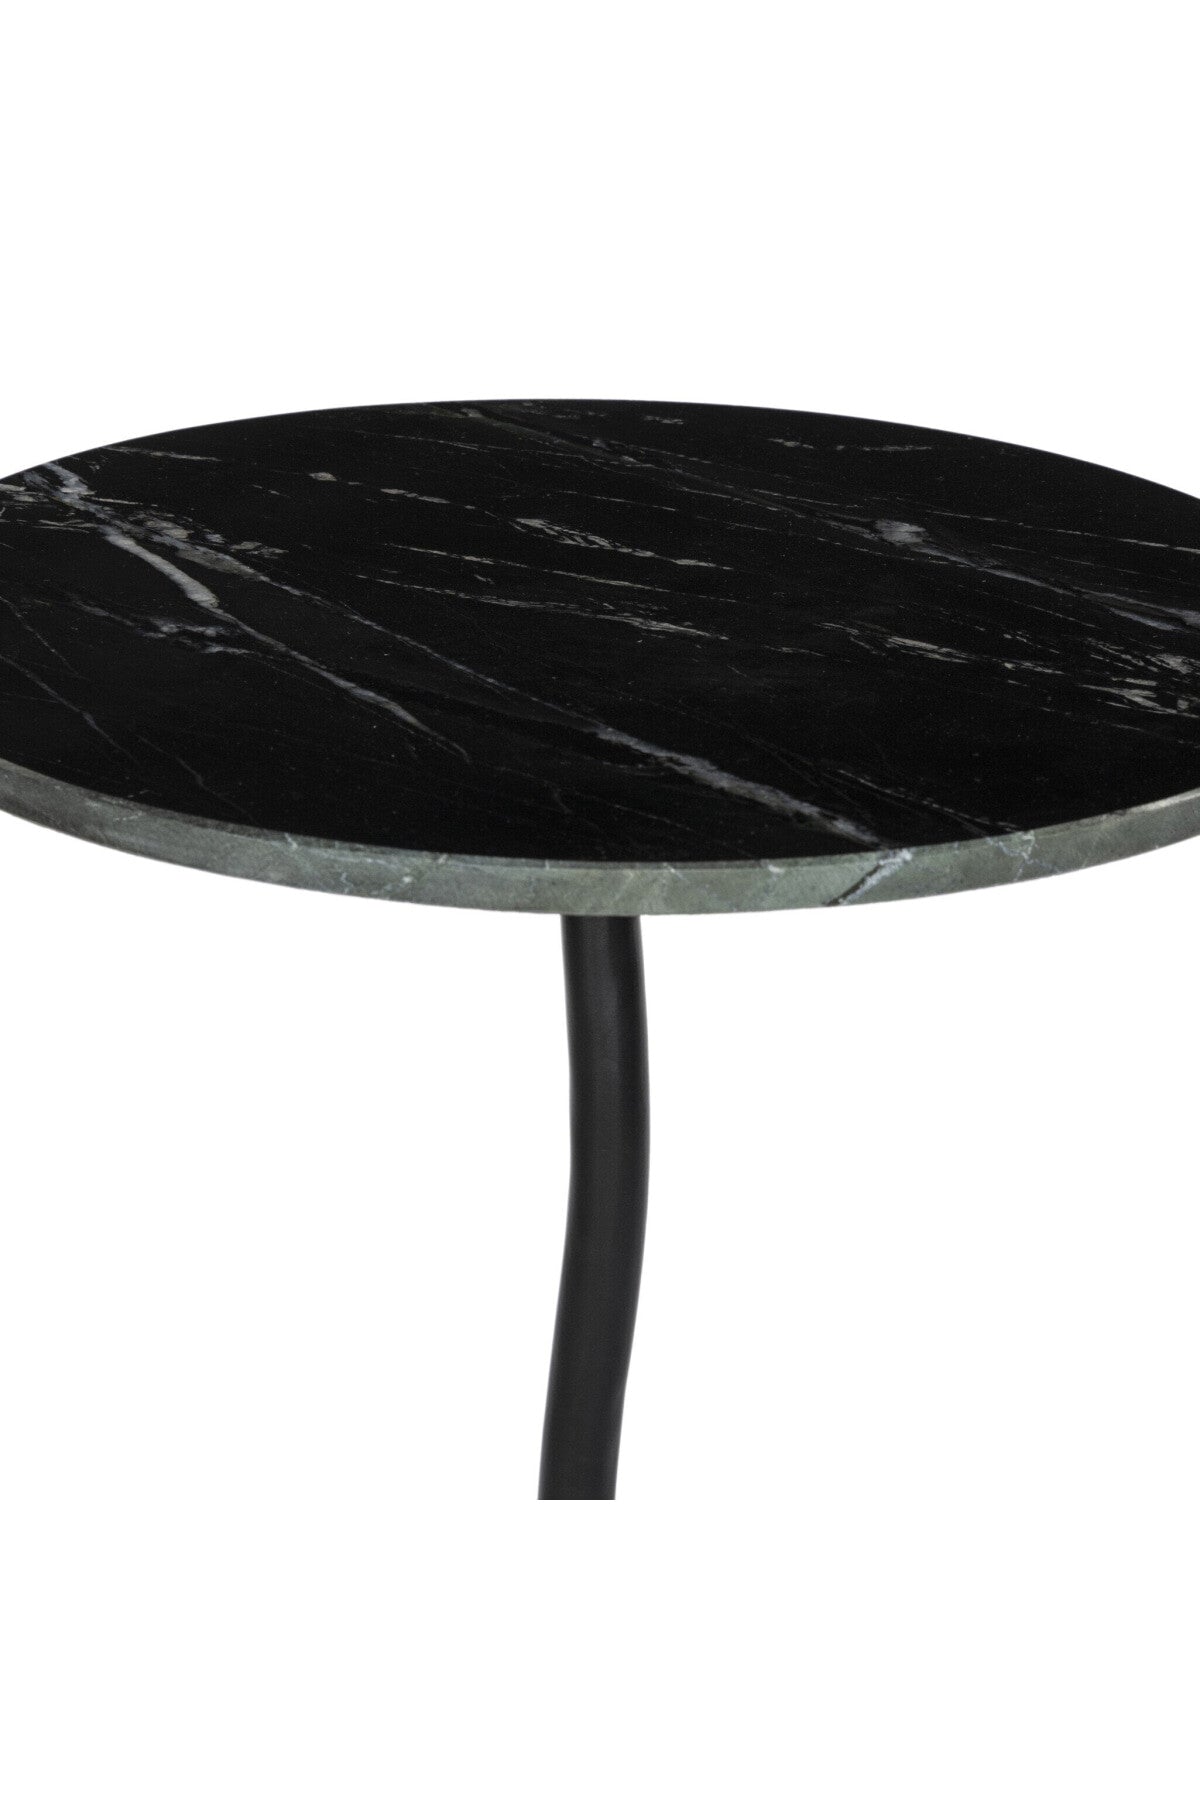 Thatcher Marble End Table - Black